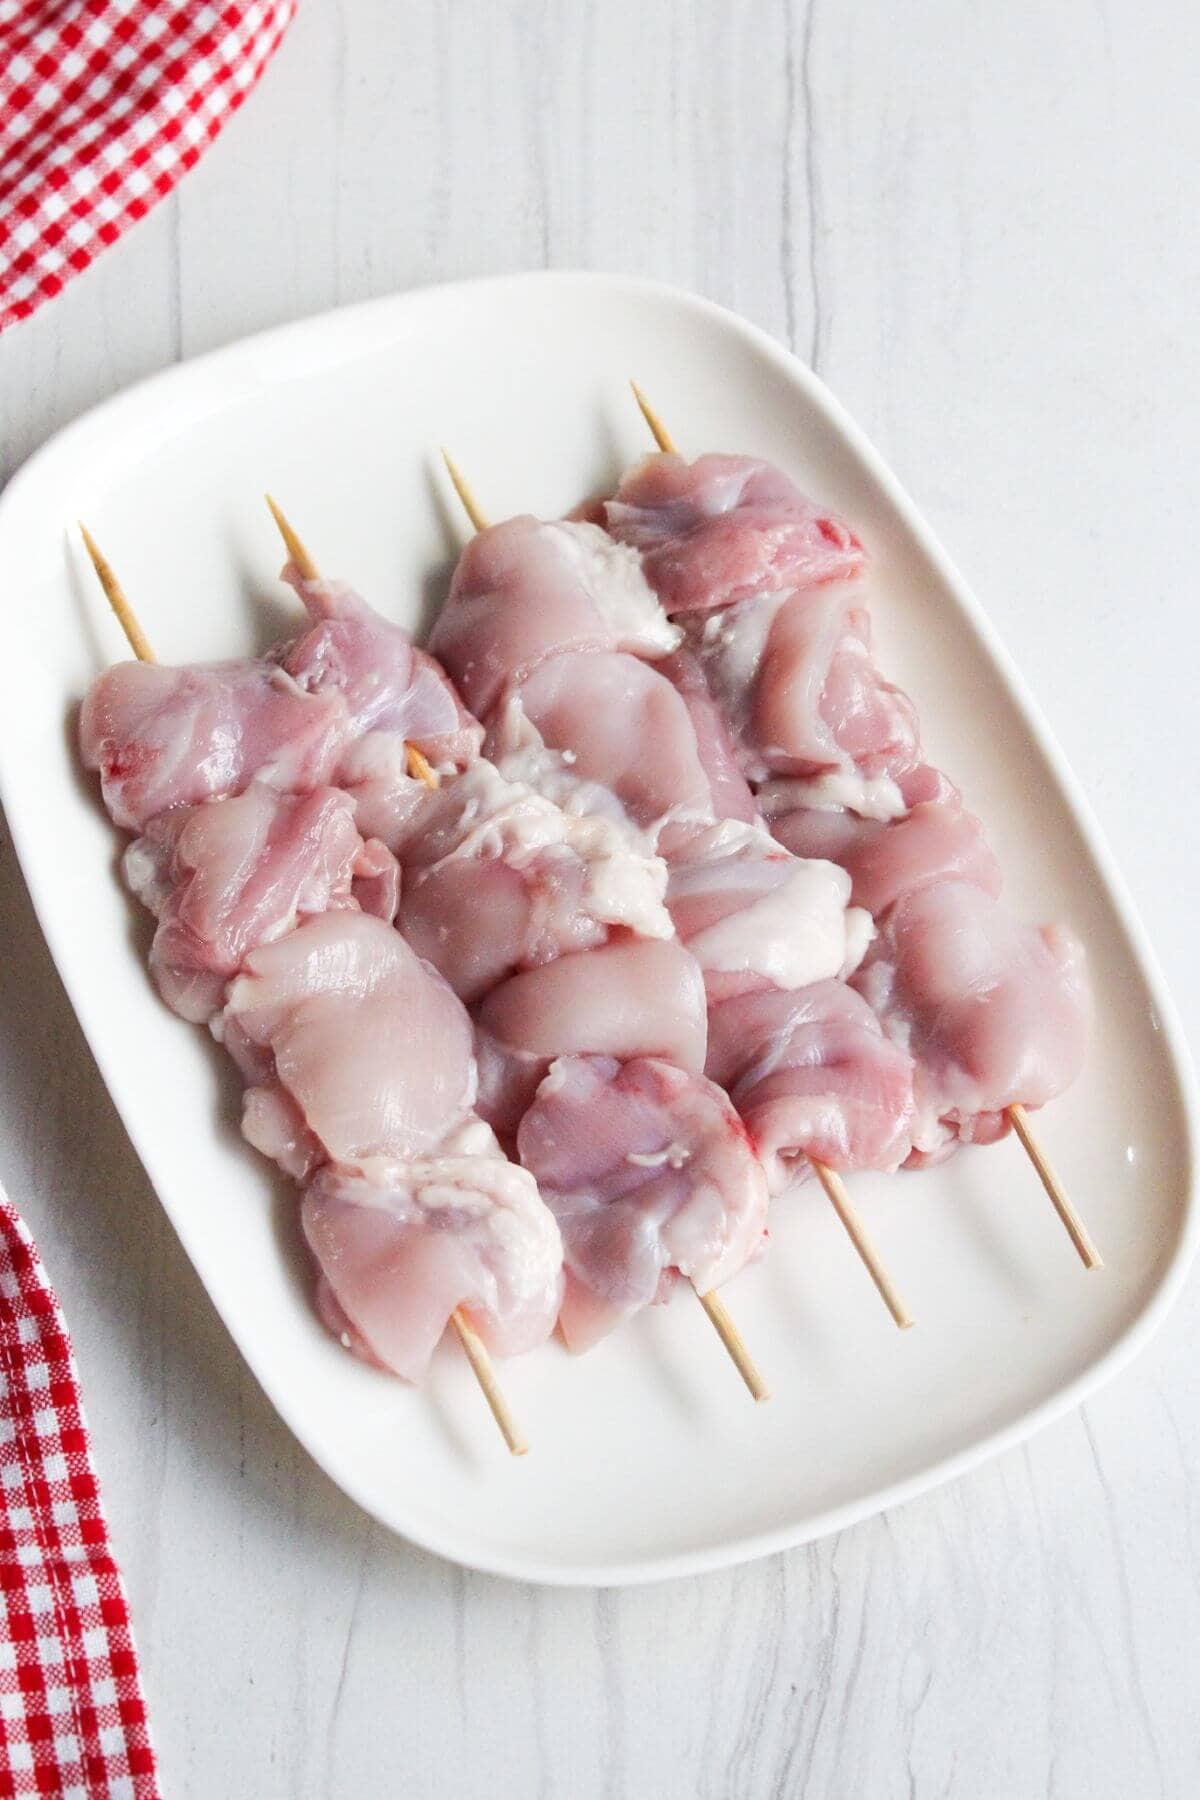 Chicken thigh meat on skewers on a white plate.